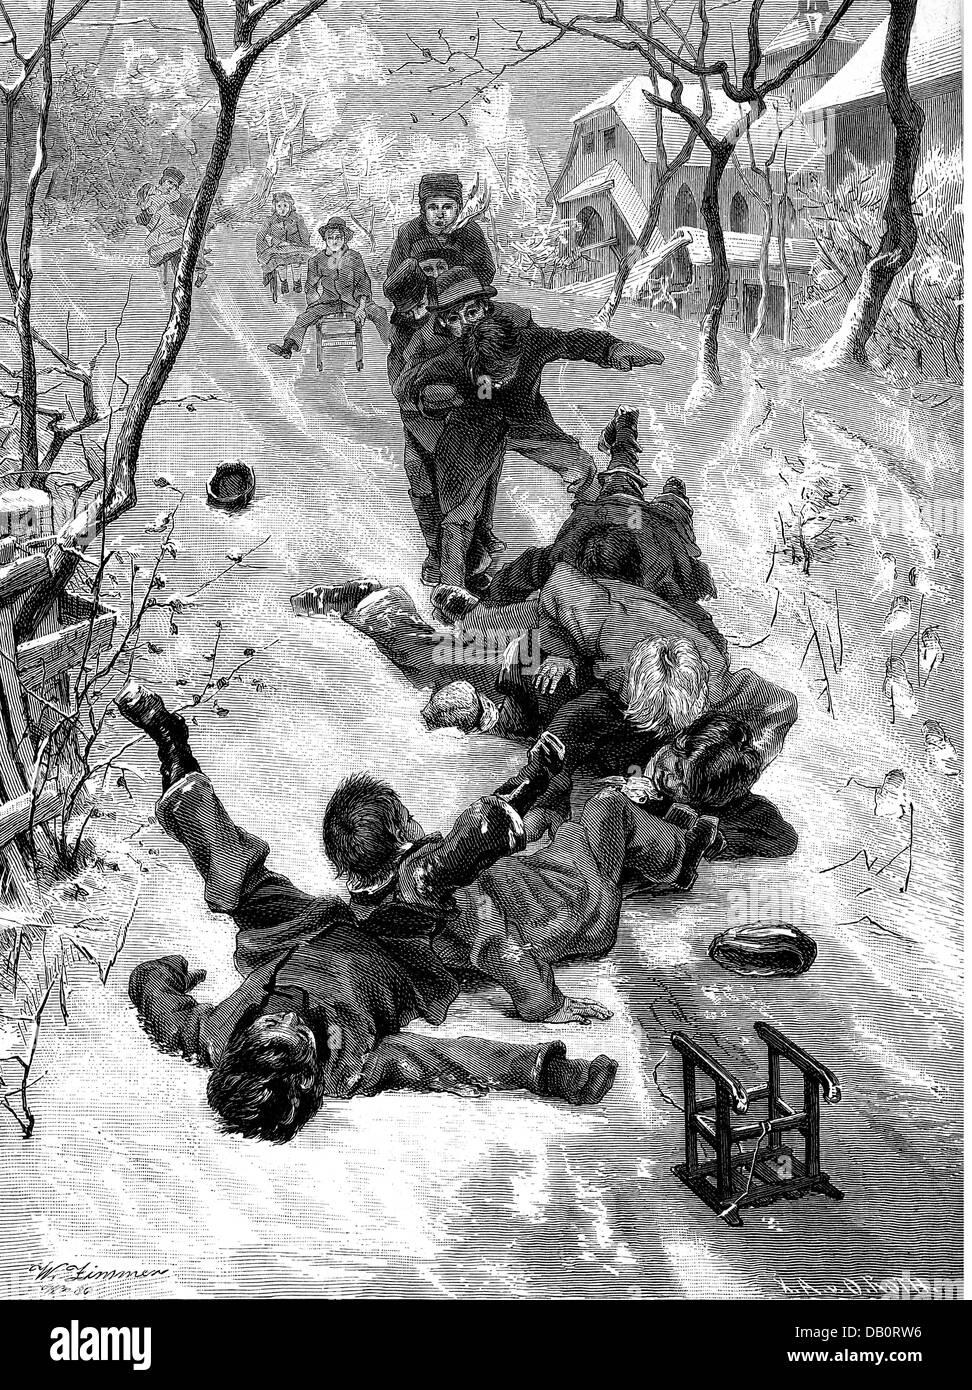 leisure, winter sports, children tobogganing, after painting, by Wilhelm Zimmer (1853 - 1937), wood engraving, by O.Roth, circa 1890, Additional-Rights-Clearences-Not Available Stock Photo